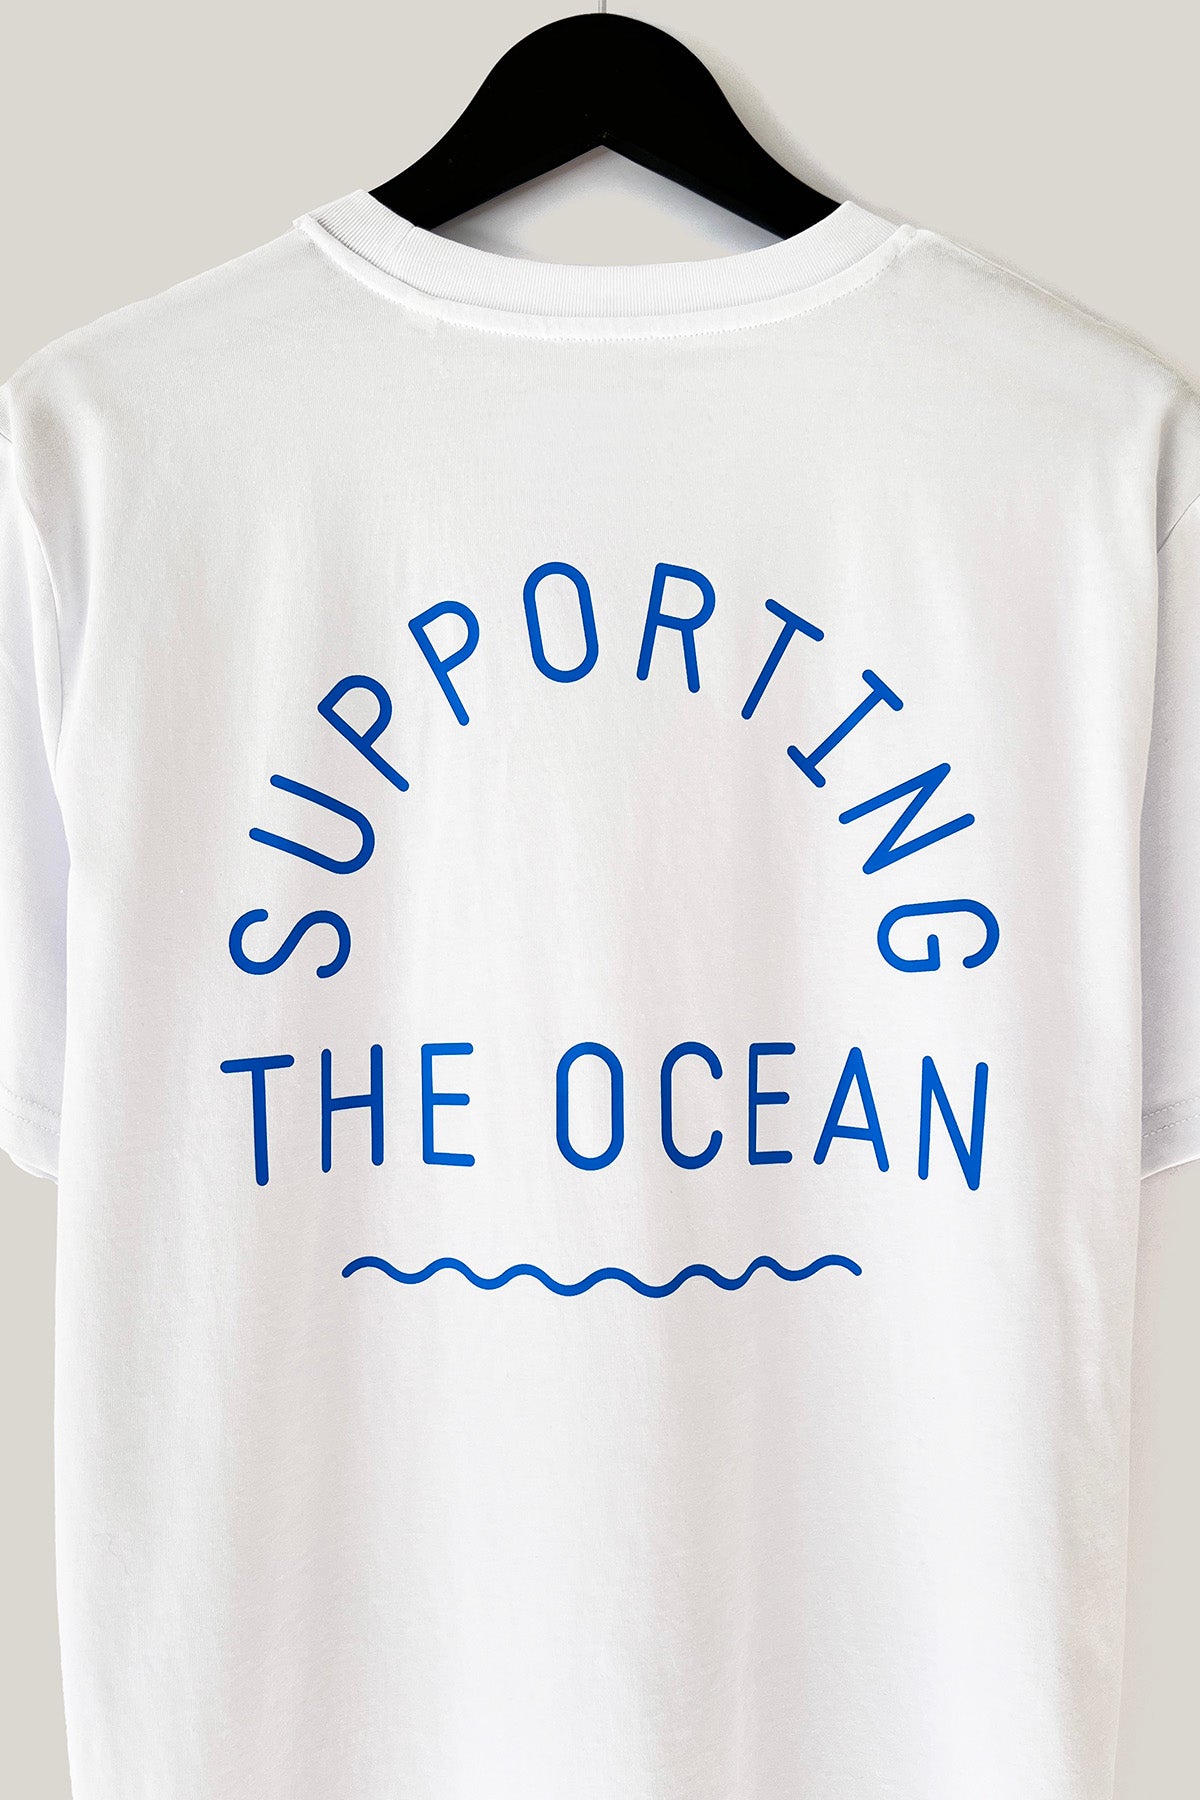 Tee "Supporting the Ocean"